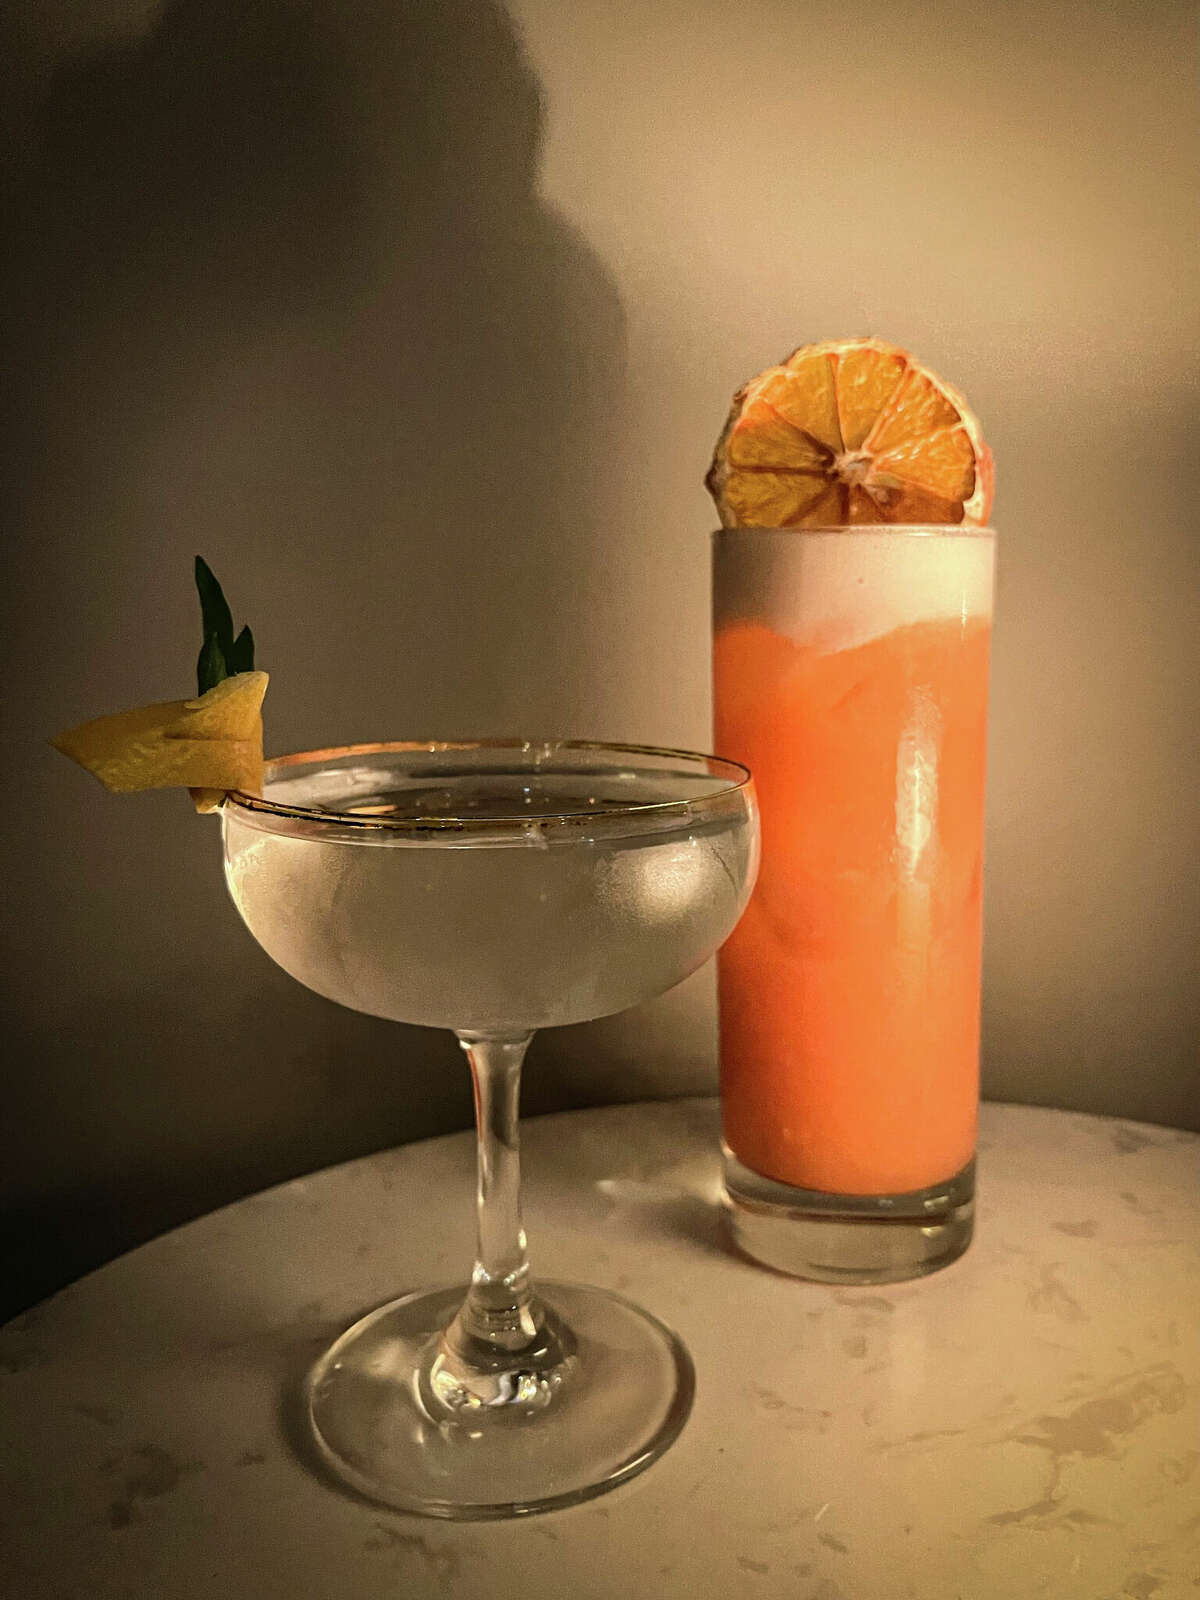 Cocktails will be an attraction at the upcoming Cugine's Italian restaurant in Stamford.